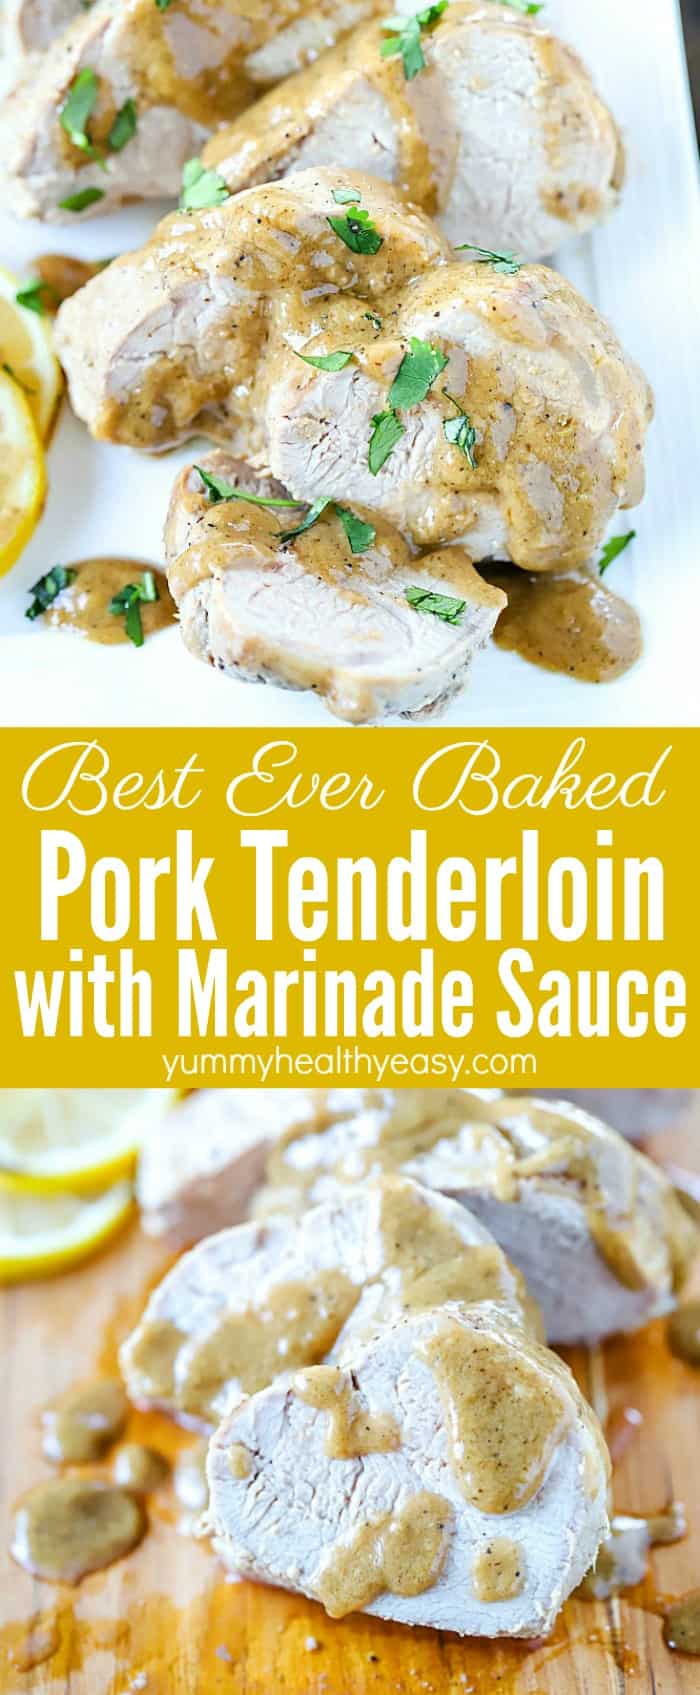 Your guests or family will LOVE this incredible tender and juicy baked pork tenderloin that's marinated then baked. Slice and serve with a flavorful marinade sauce for an incredible (and easy) dinner! AD